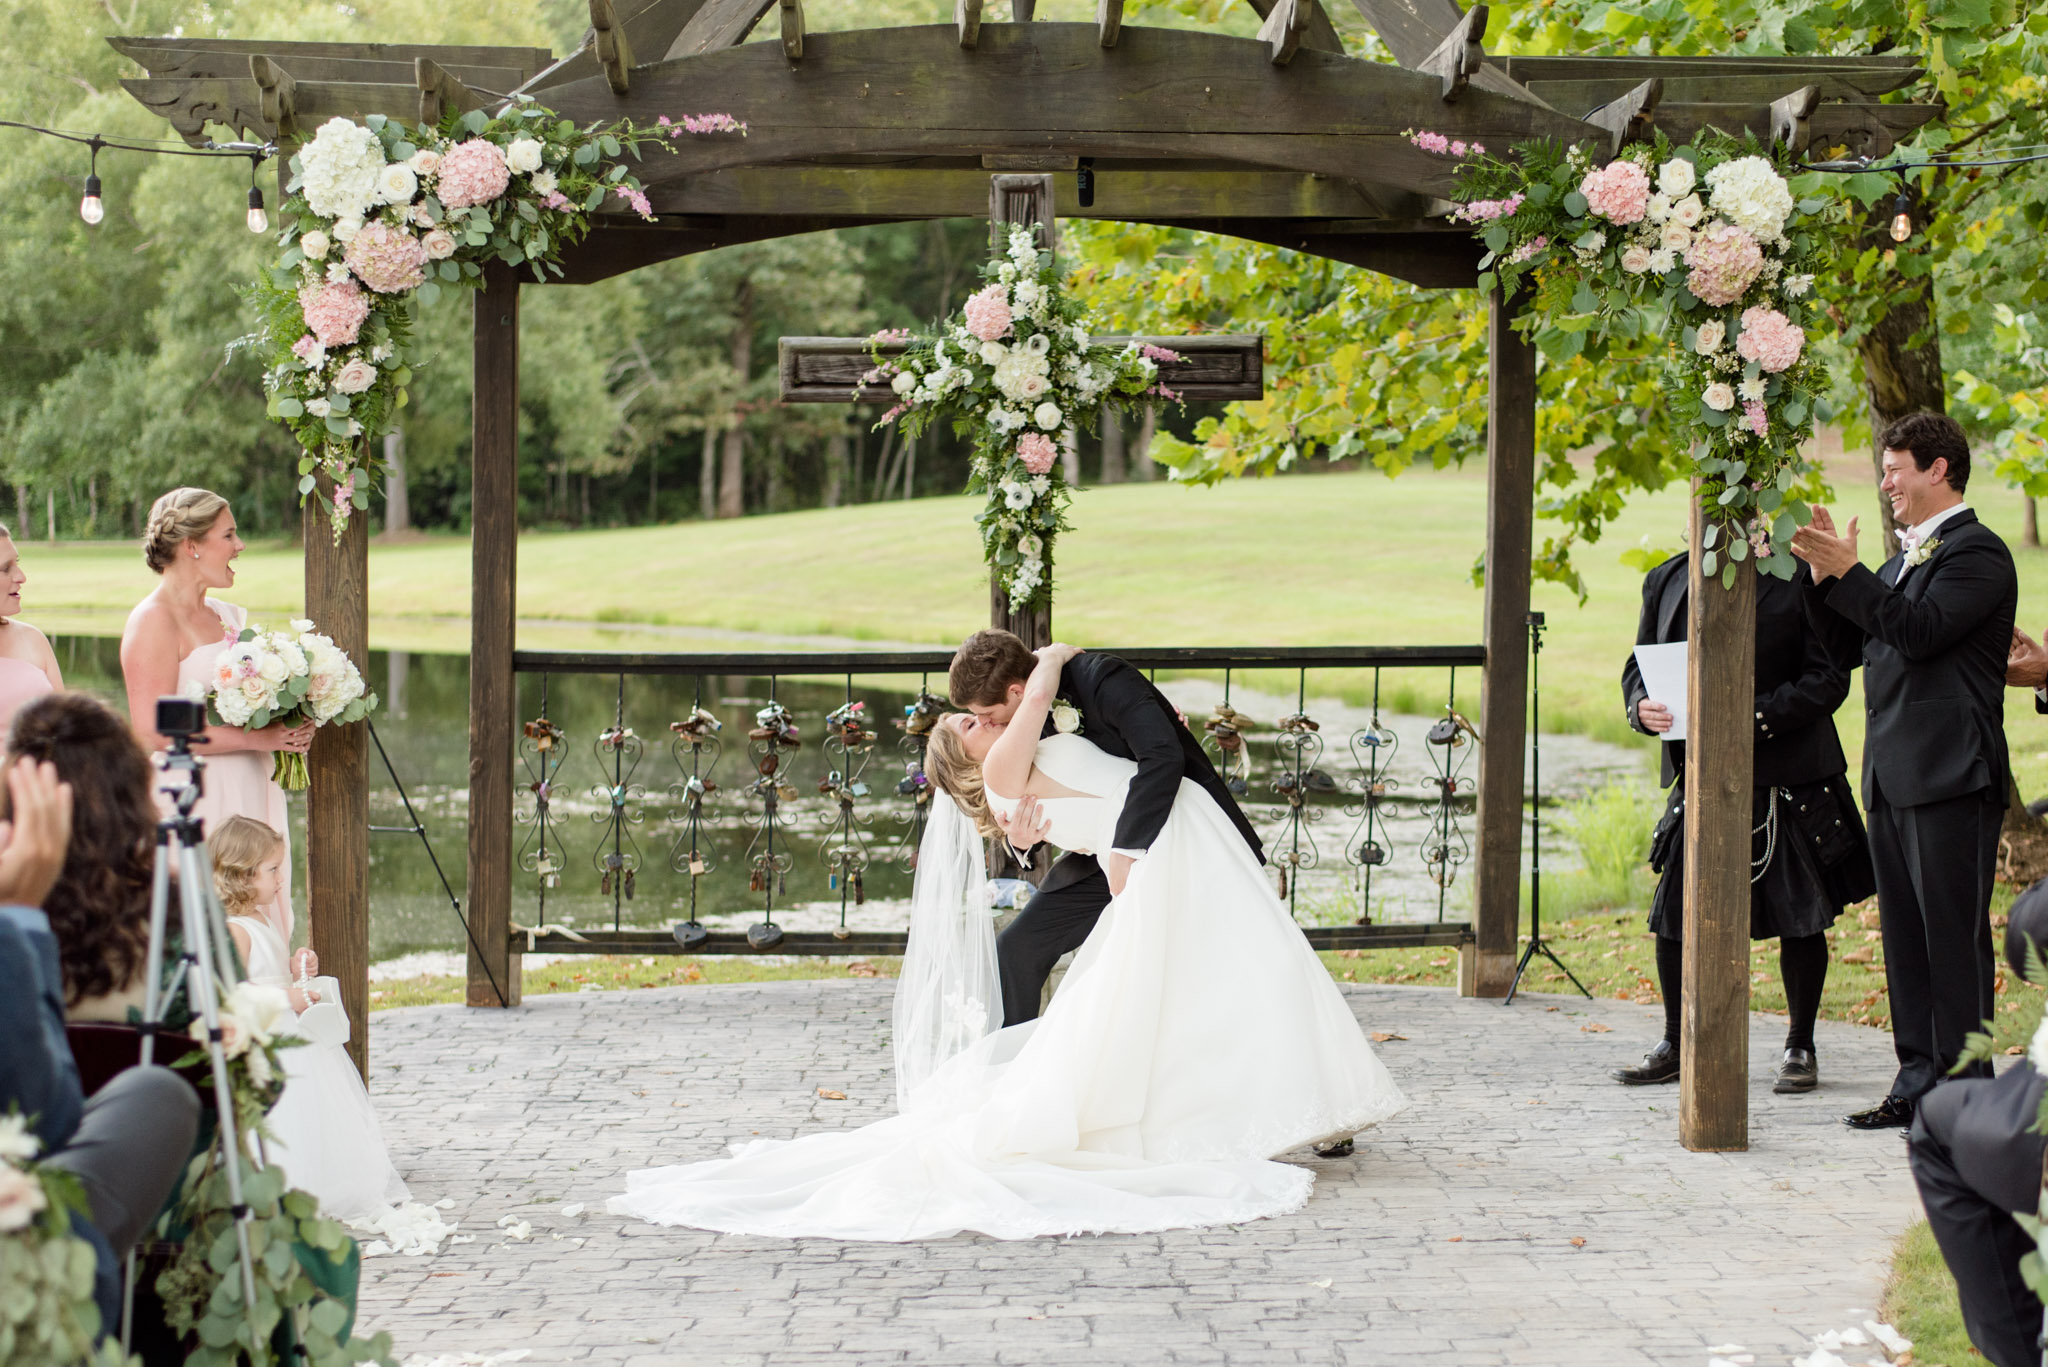 Groom dips bride for first kiss.